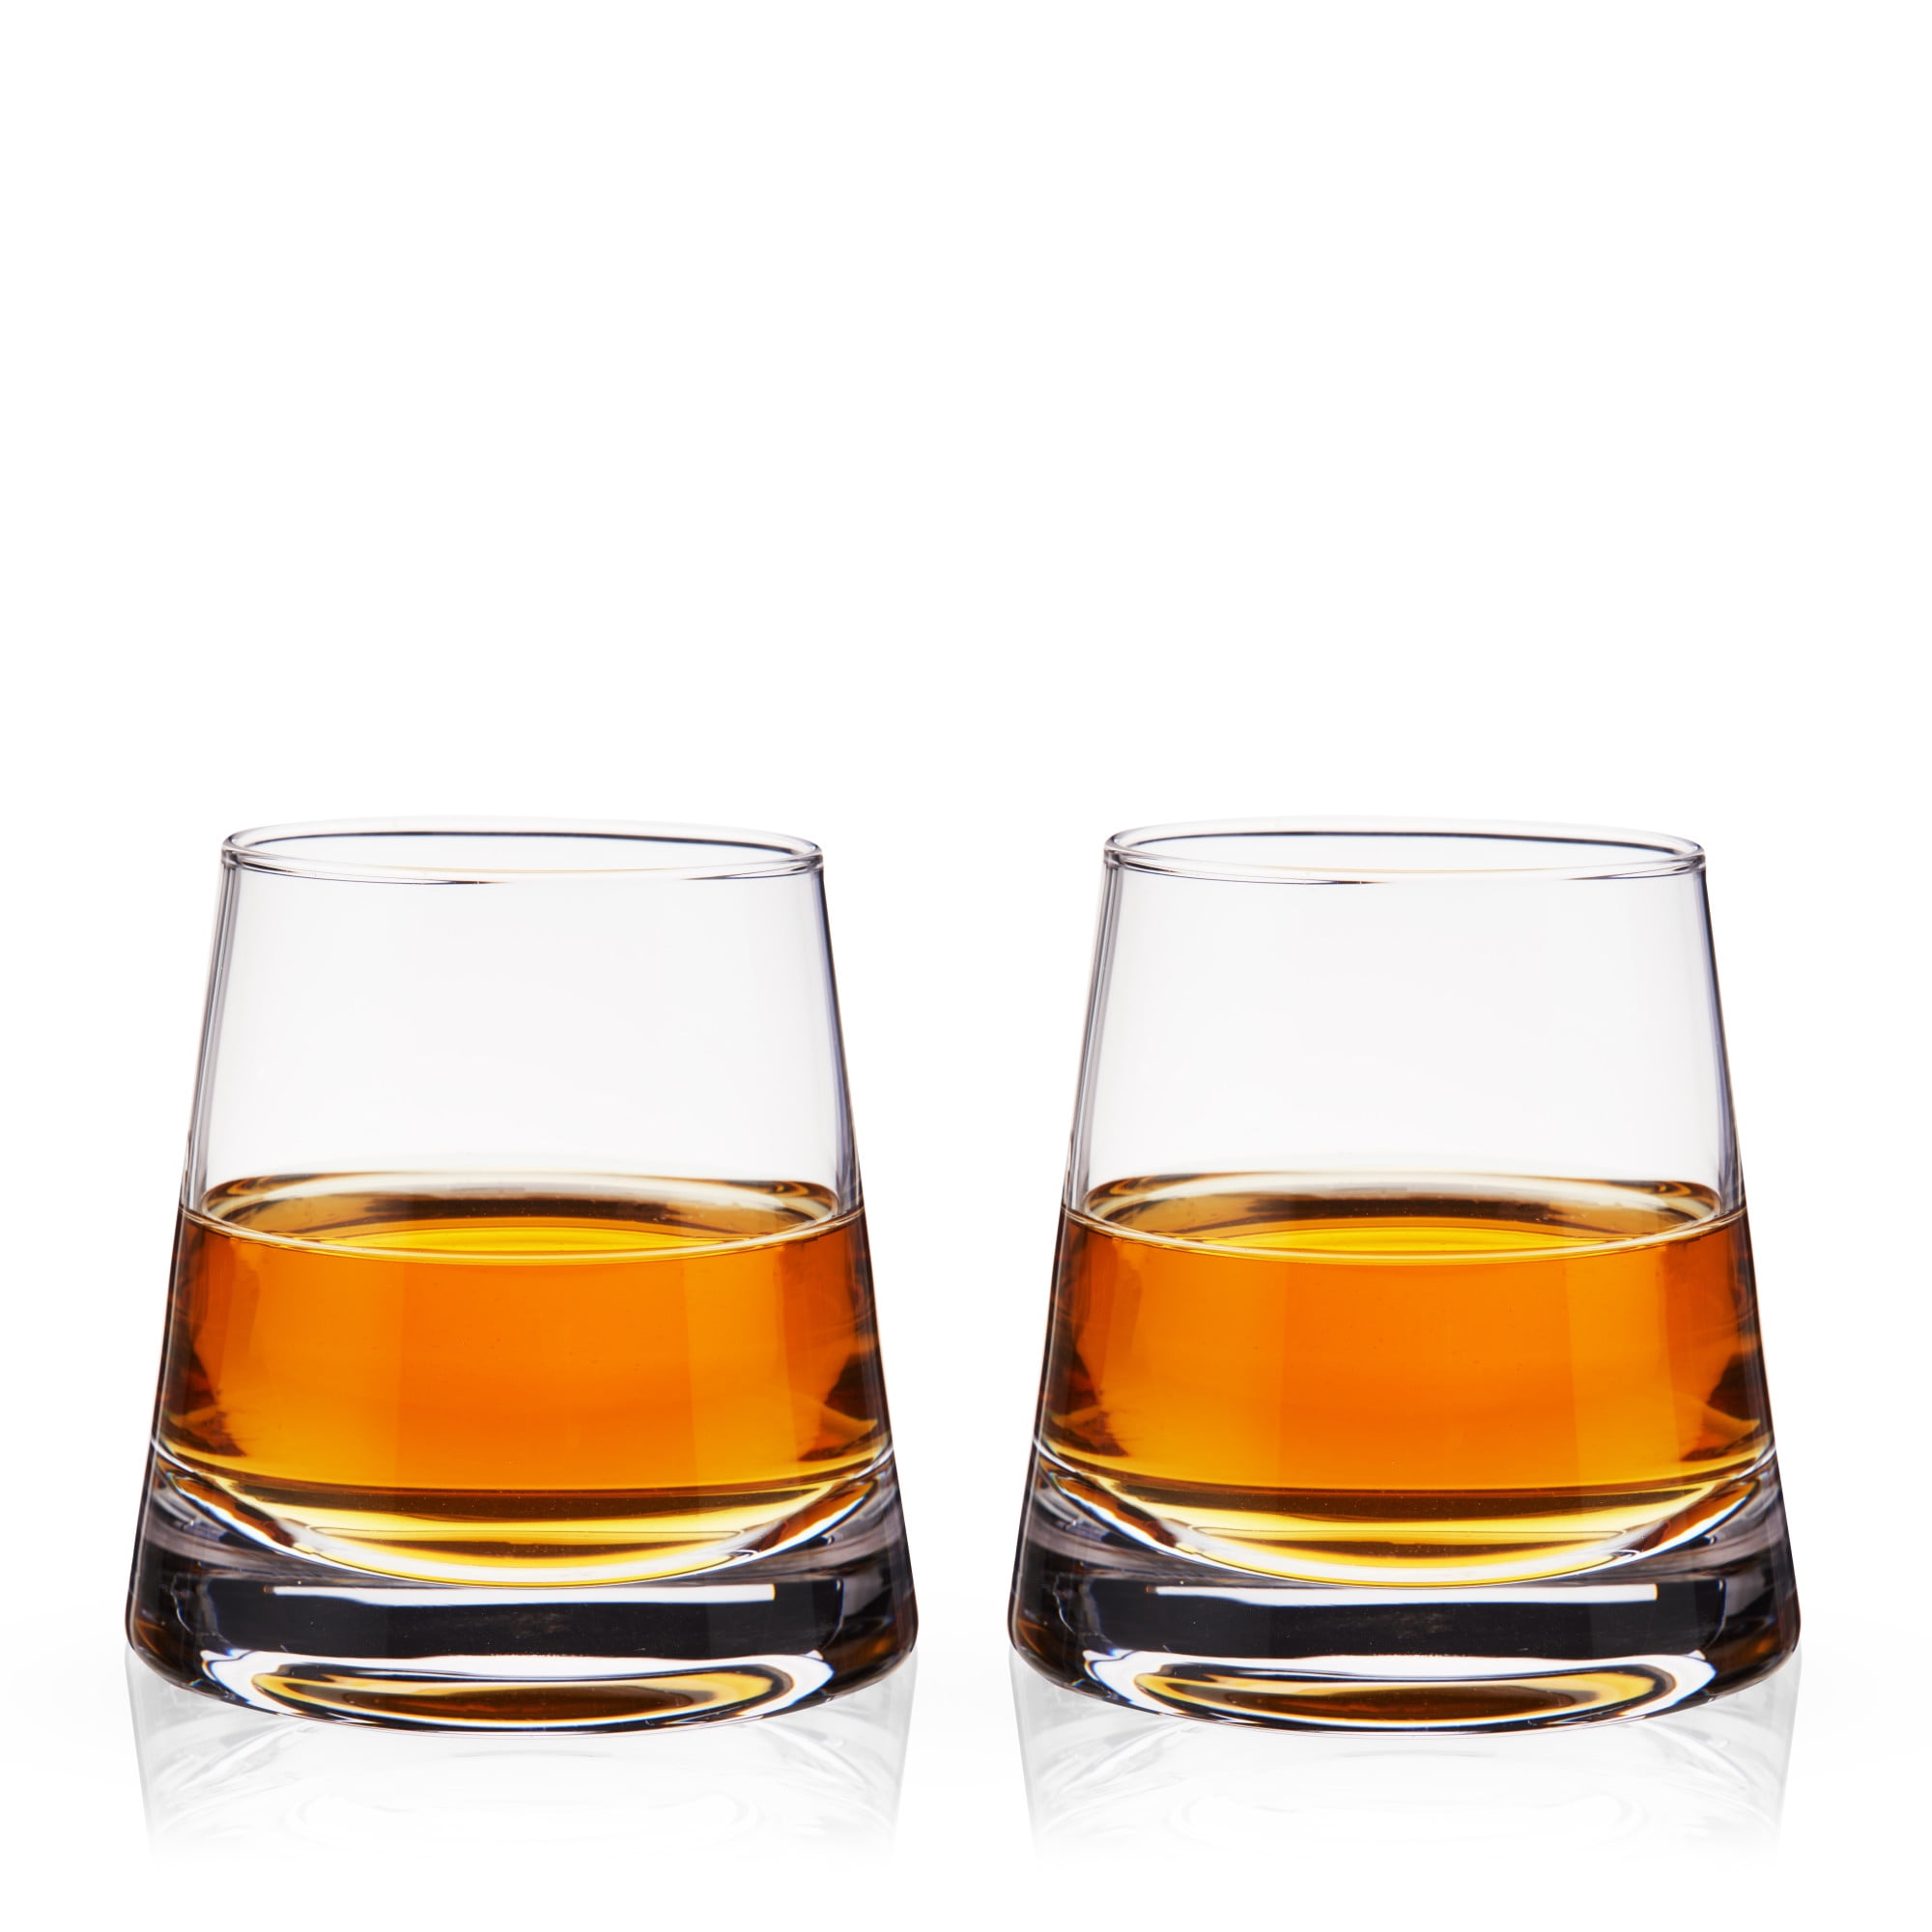 KANARS Square Whiskey Glass - Lead Free Crystal Rocks Scotch Tumbler for Bourbon or Whisky - 9 oz Set of 4 - Men Gift, Clear